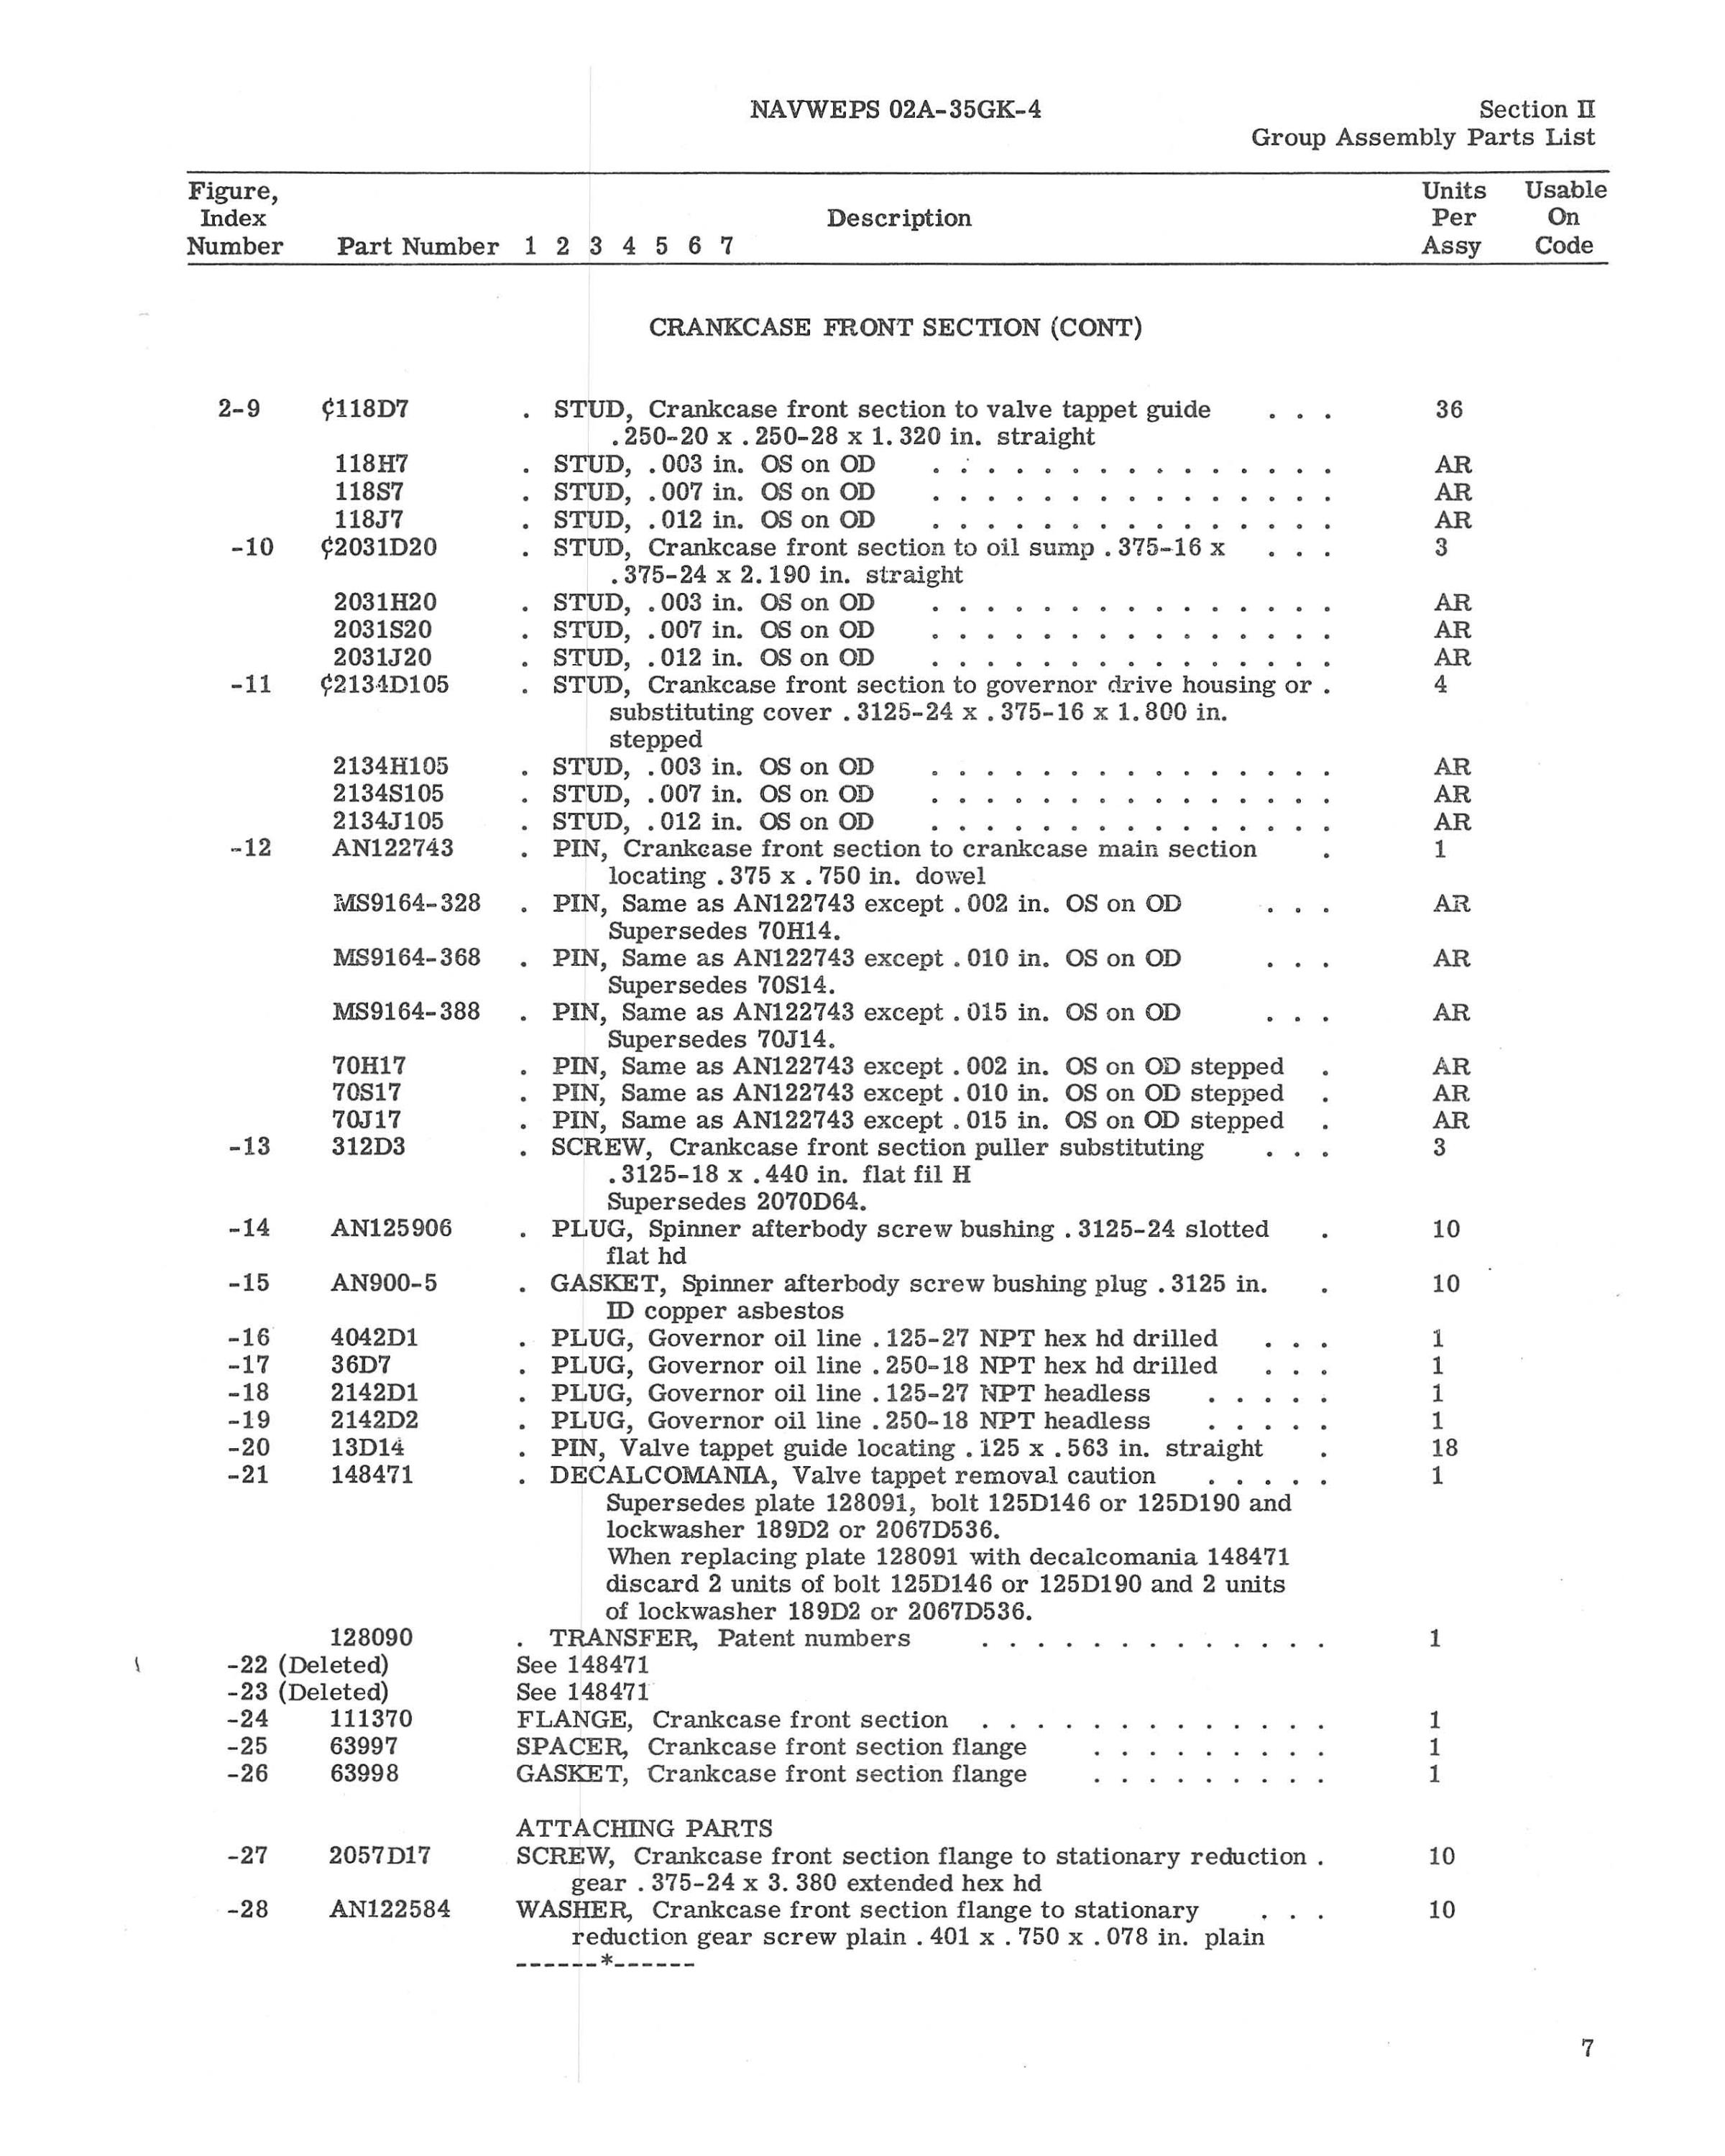 Sample page 13 from AirCorps Library document: Illustrated Parts Breakdown for R-1820-80 Engines